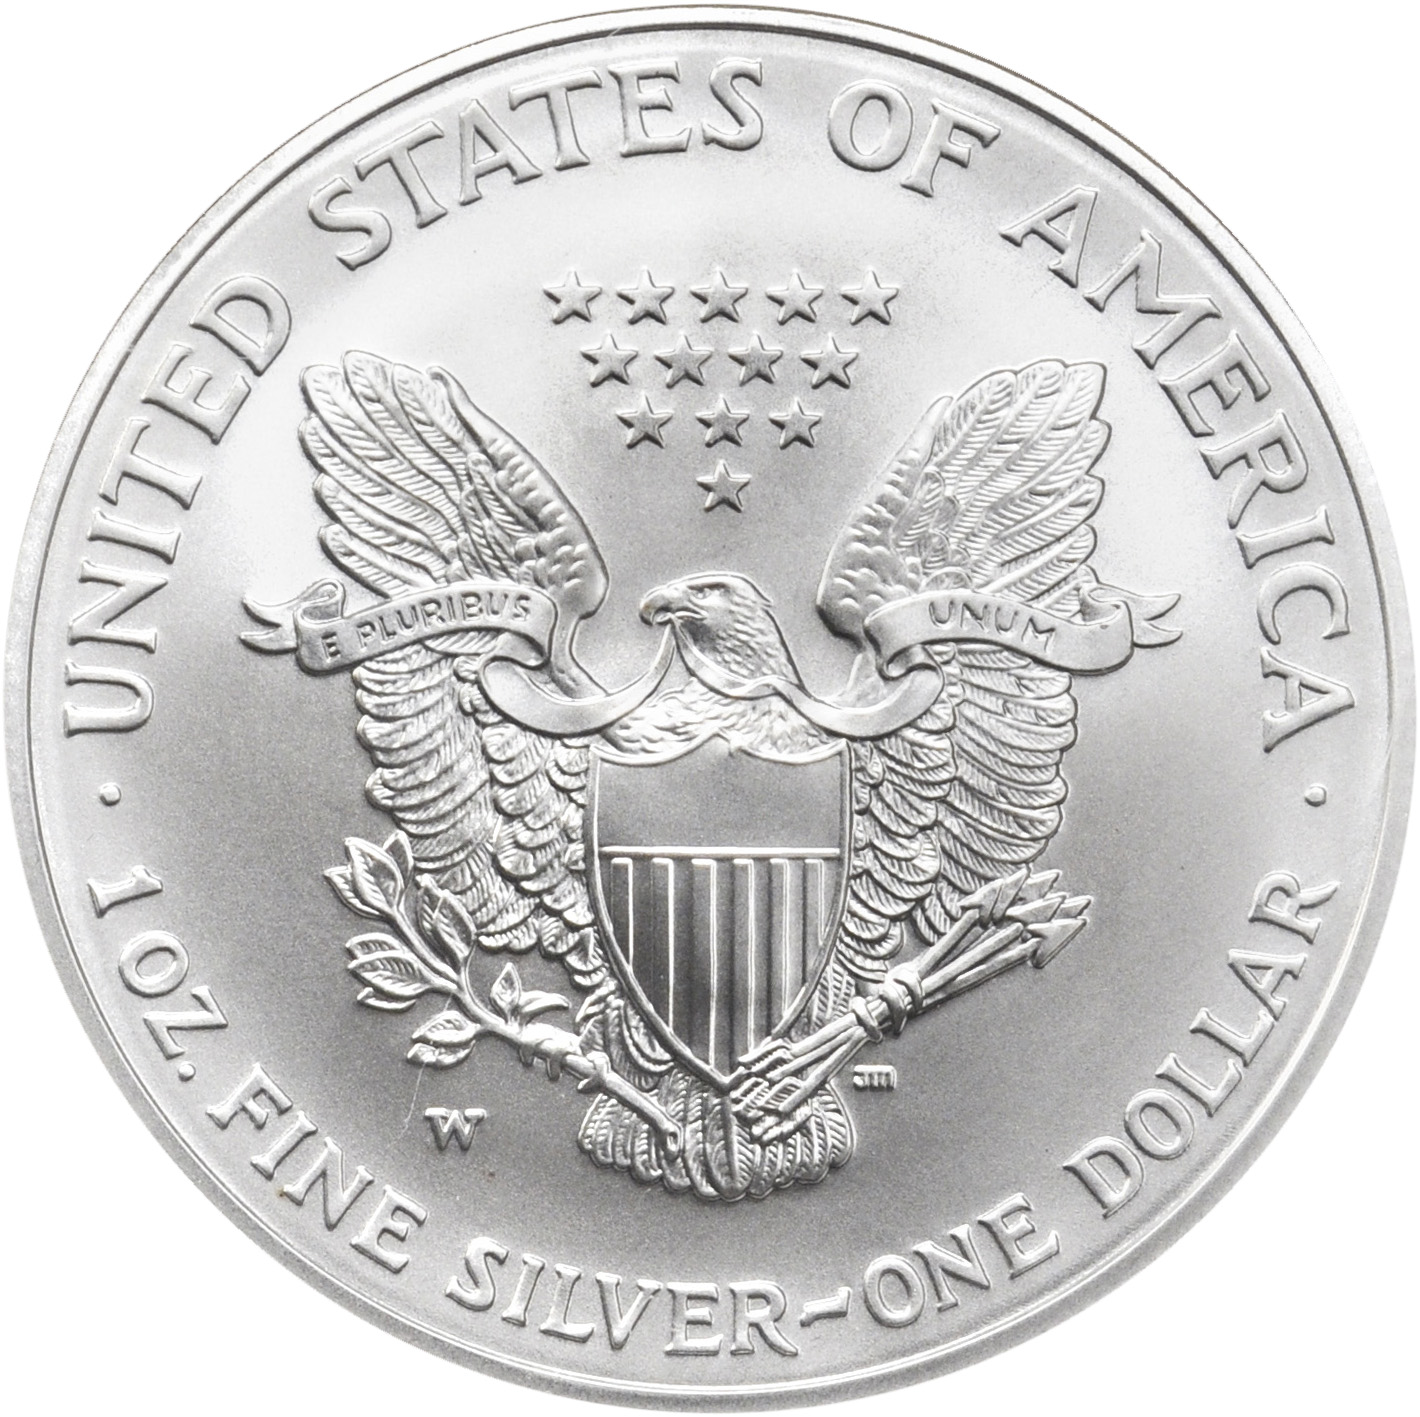 Value of 2007 $1 Silver Coin